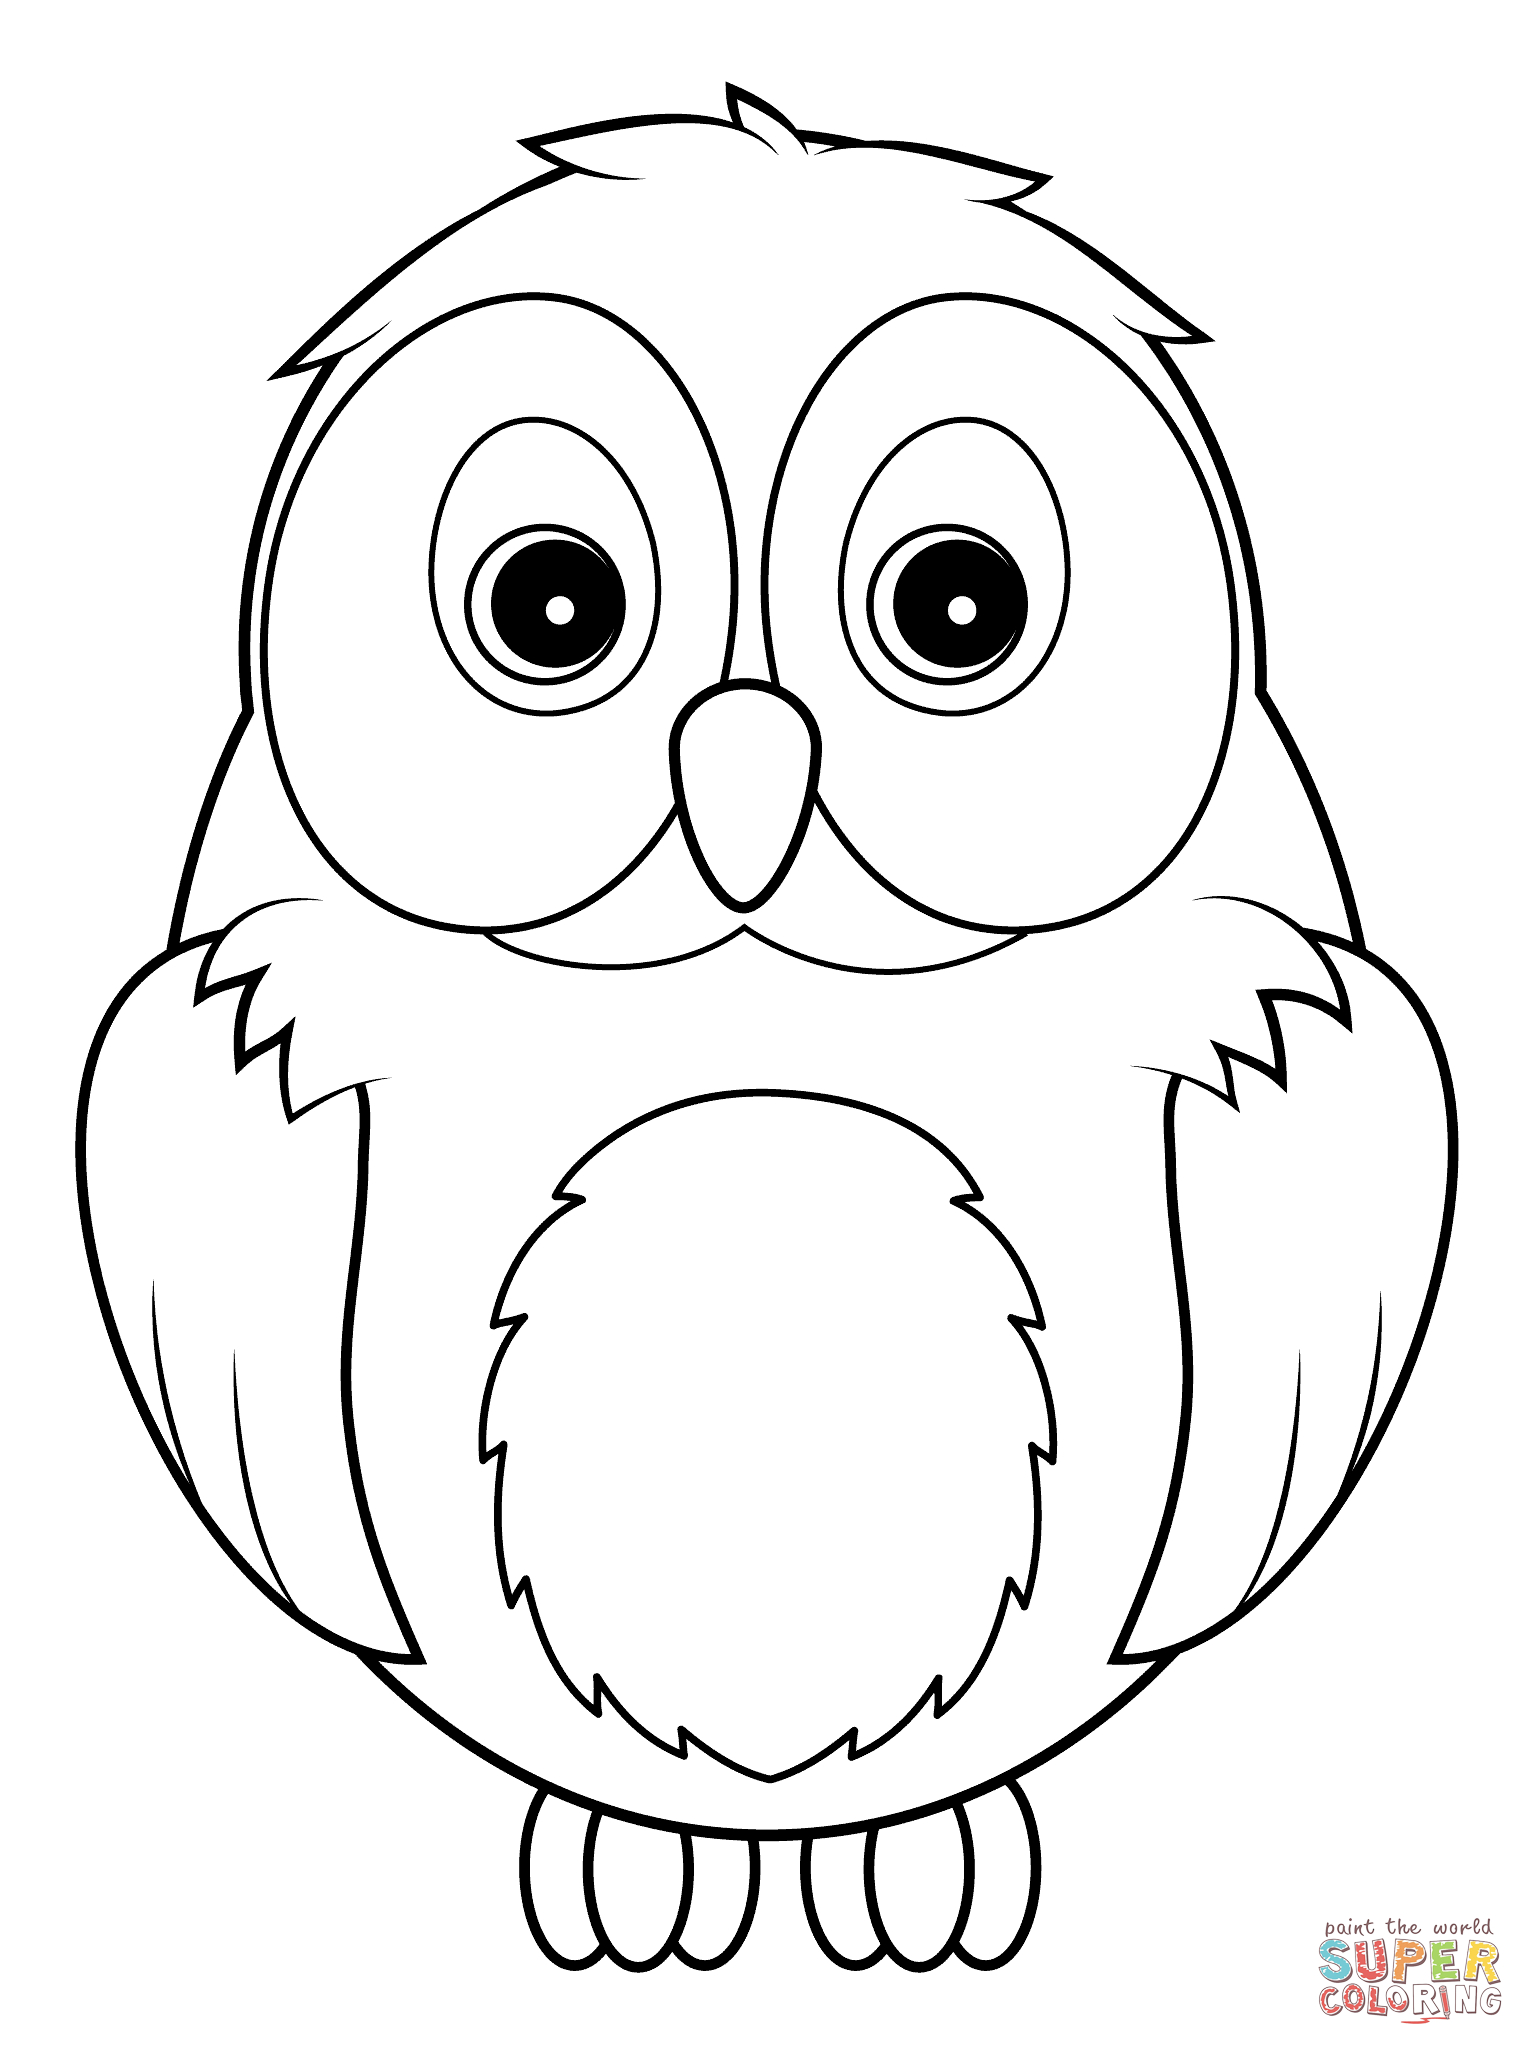 Cute Owl Coloring Page | Free Printable Coloring Pages - Free Printable Owl Coloring Sheets